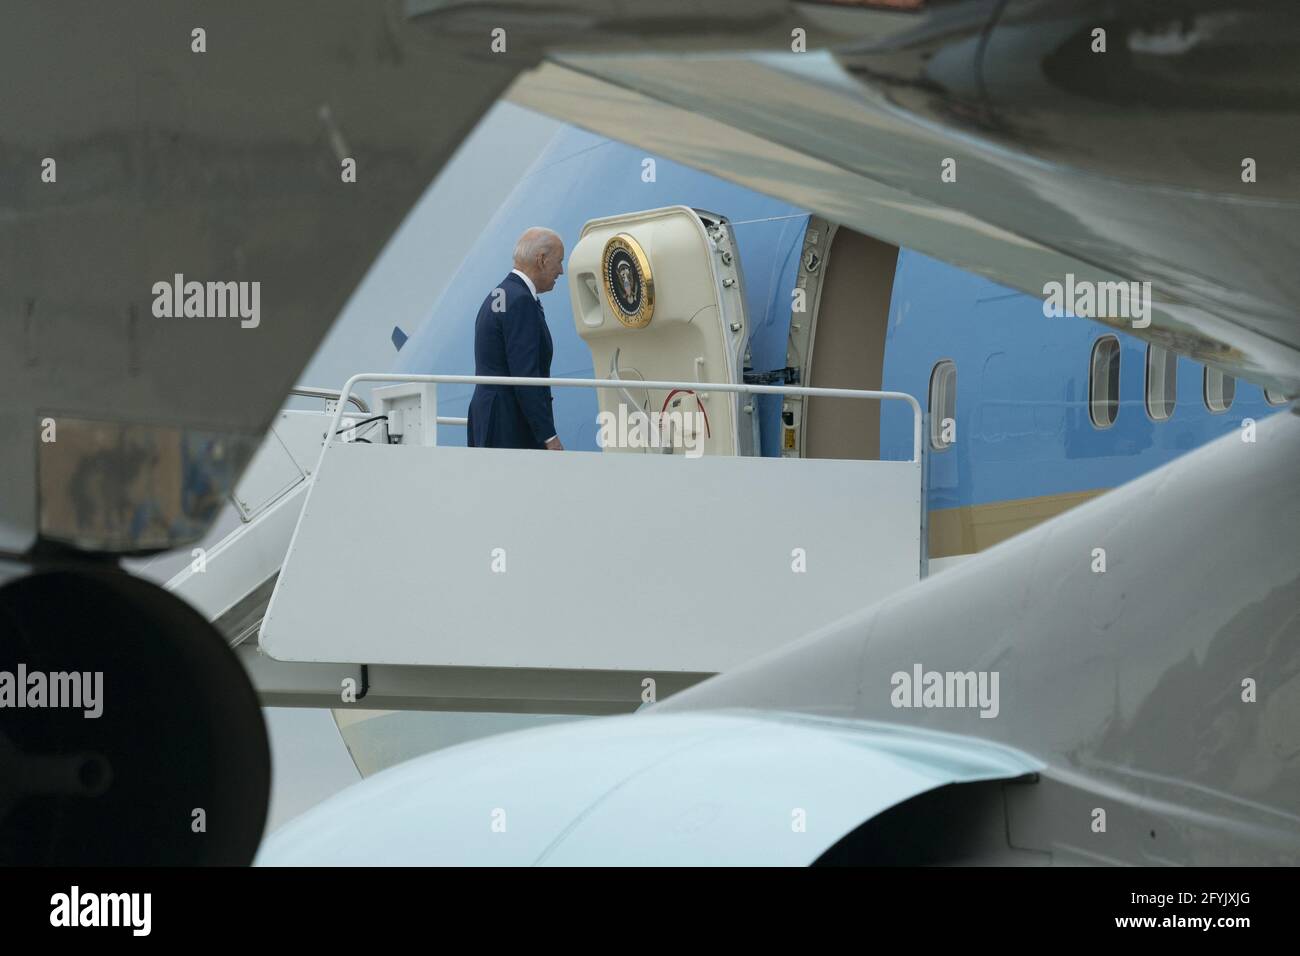 United States President Joe Biden boards Air Force One at Joint Base Andrews, to make remarks at Joint Base Langley-Eustis in Virginia, Friday, May 28, 2021. Credit: Chris Kleponis / Pool via CNP Stock Photo